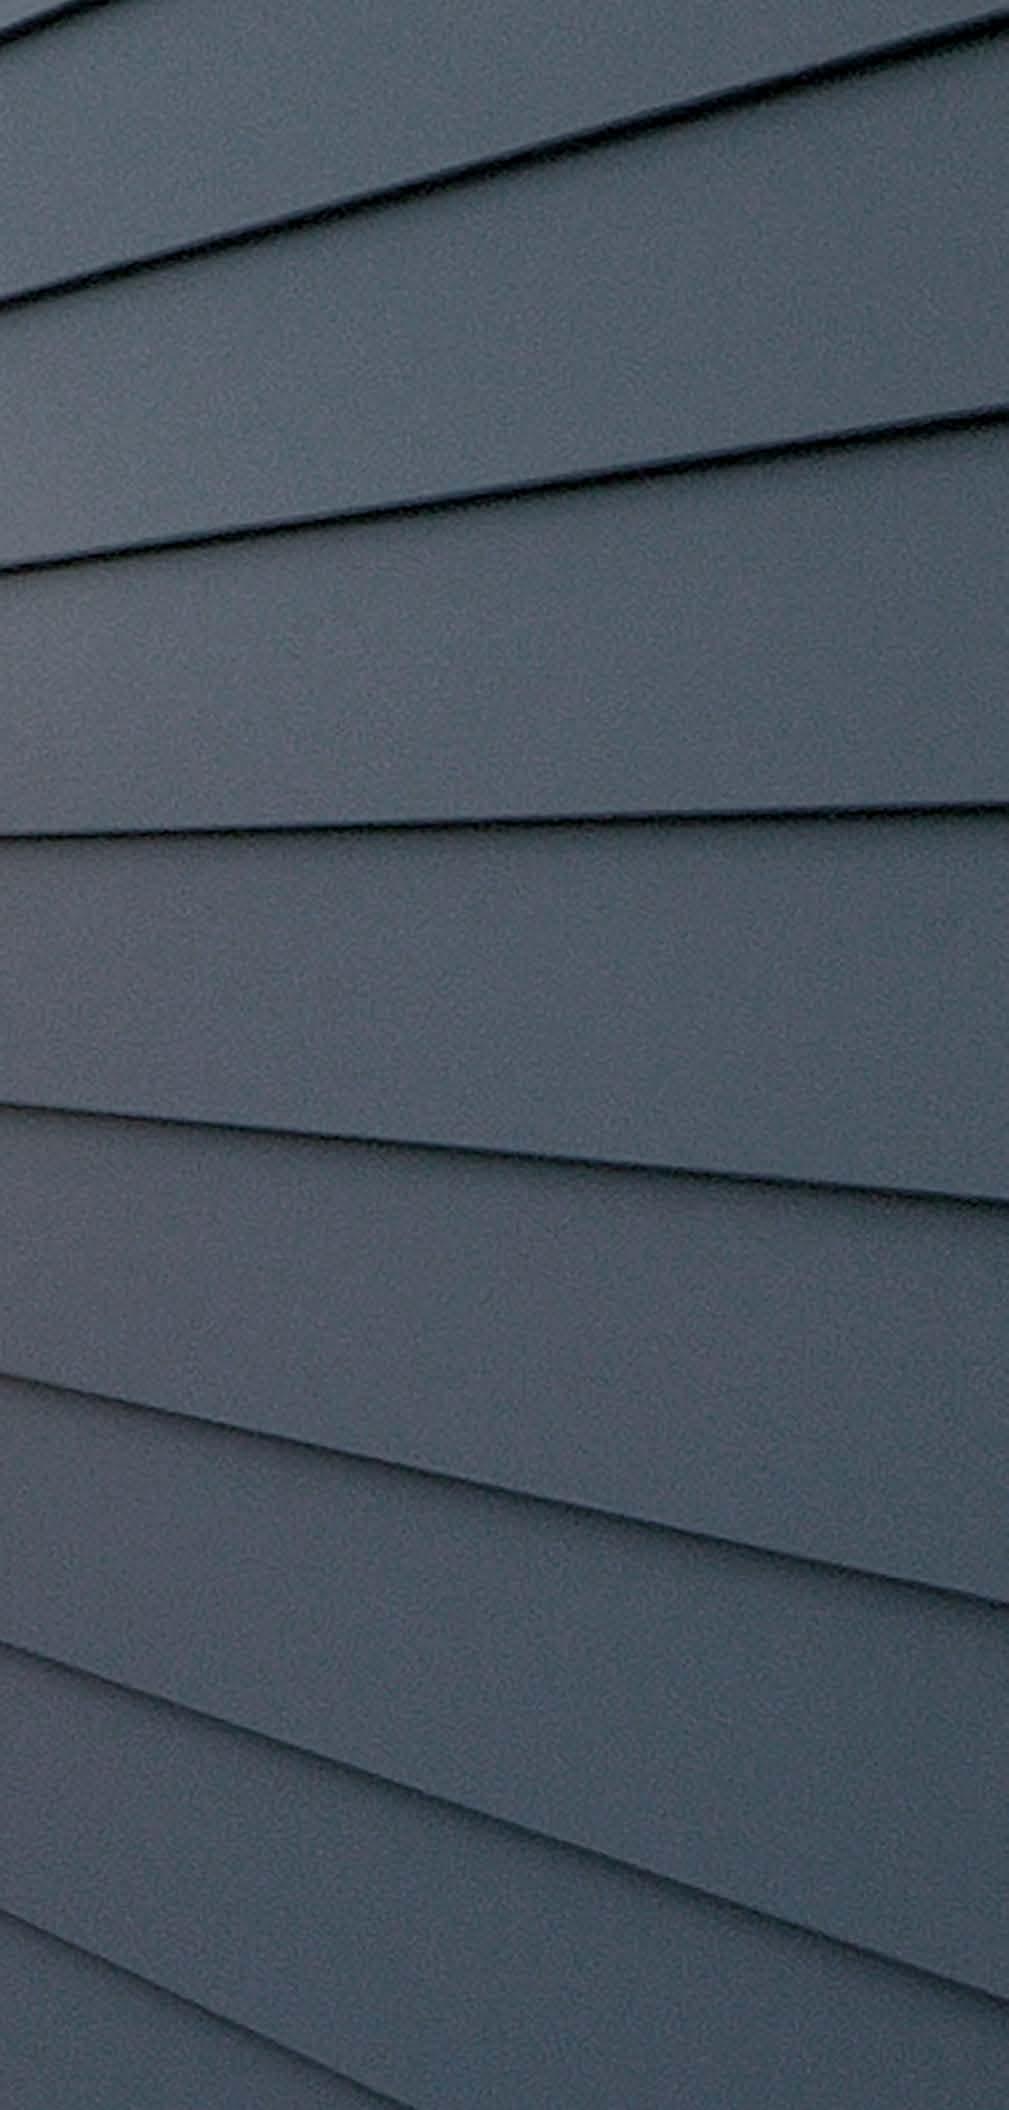 The Aspyre Collection brings together the Reveal Panel System and Artisan siding to